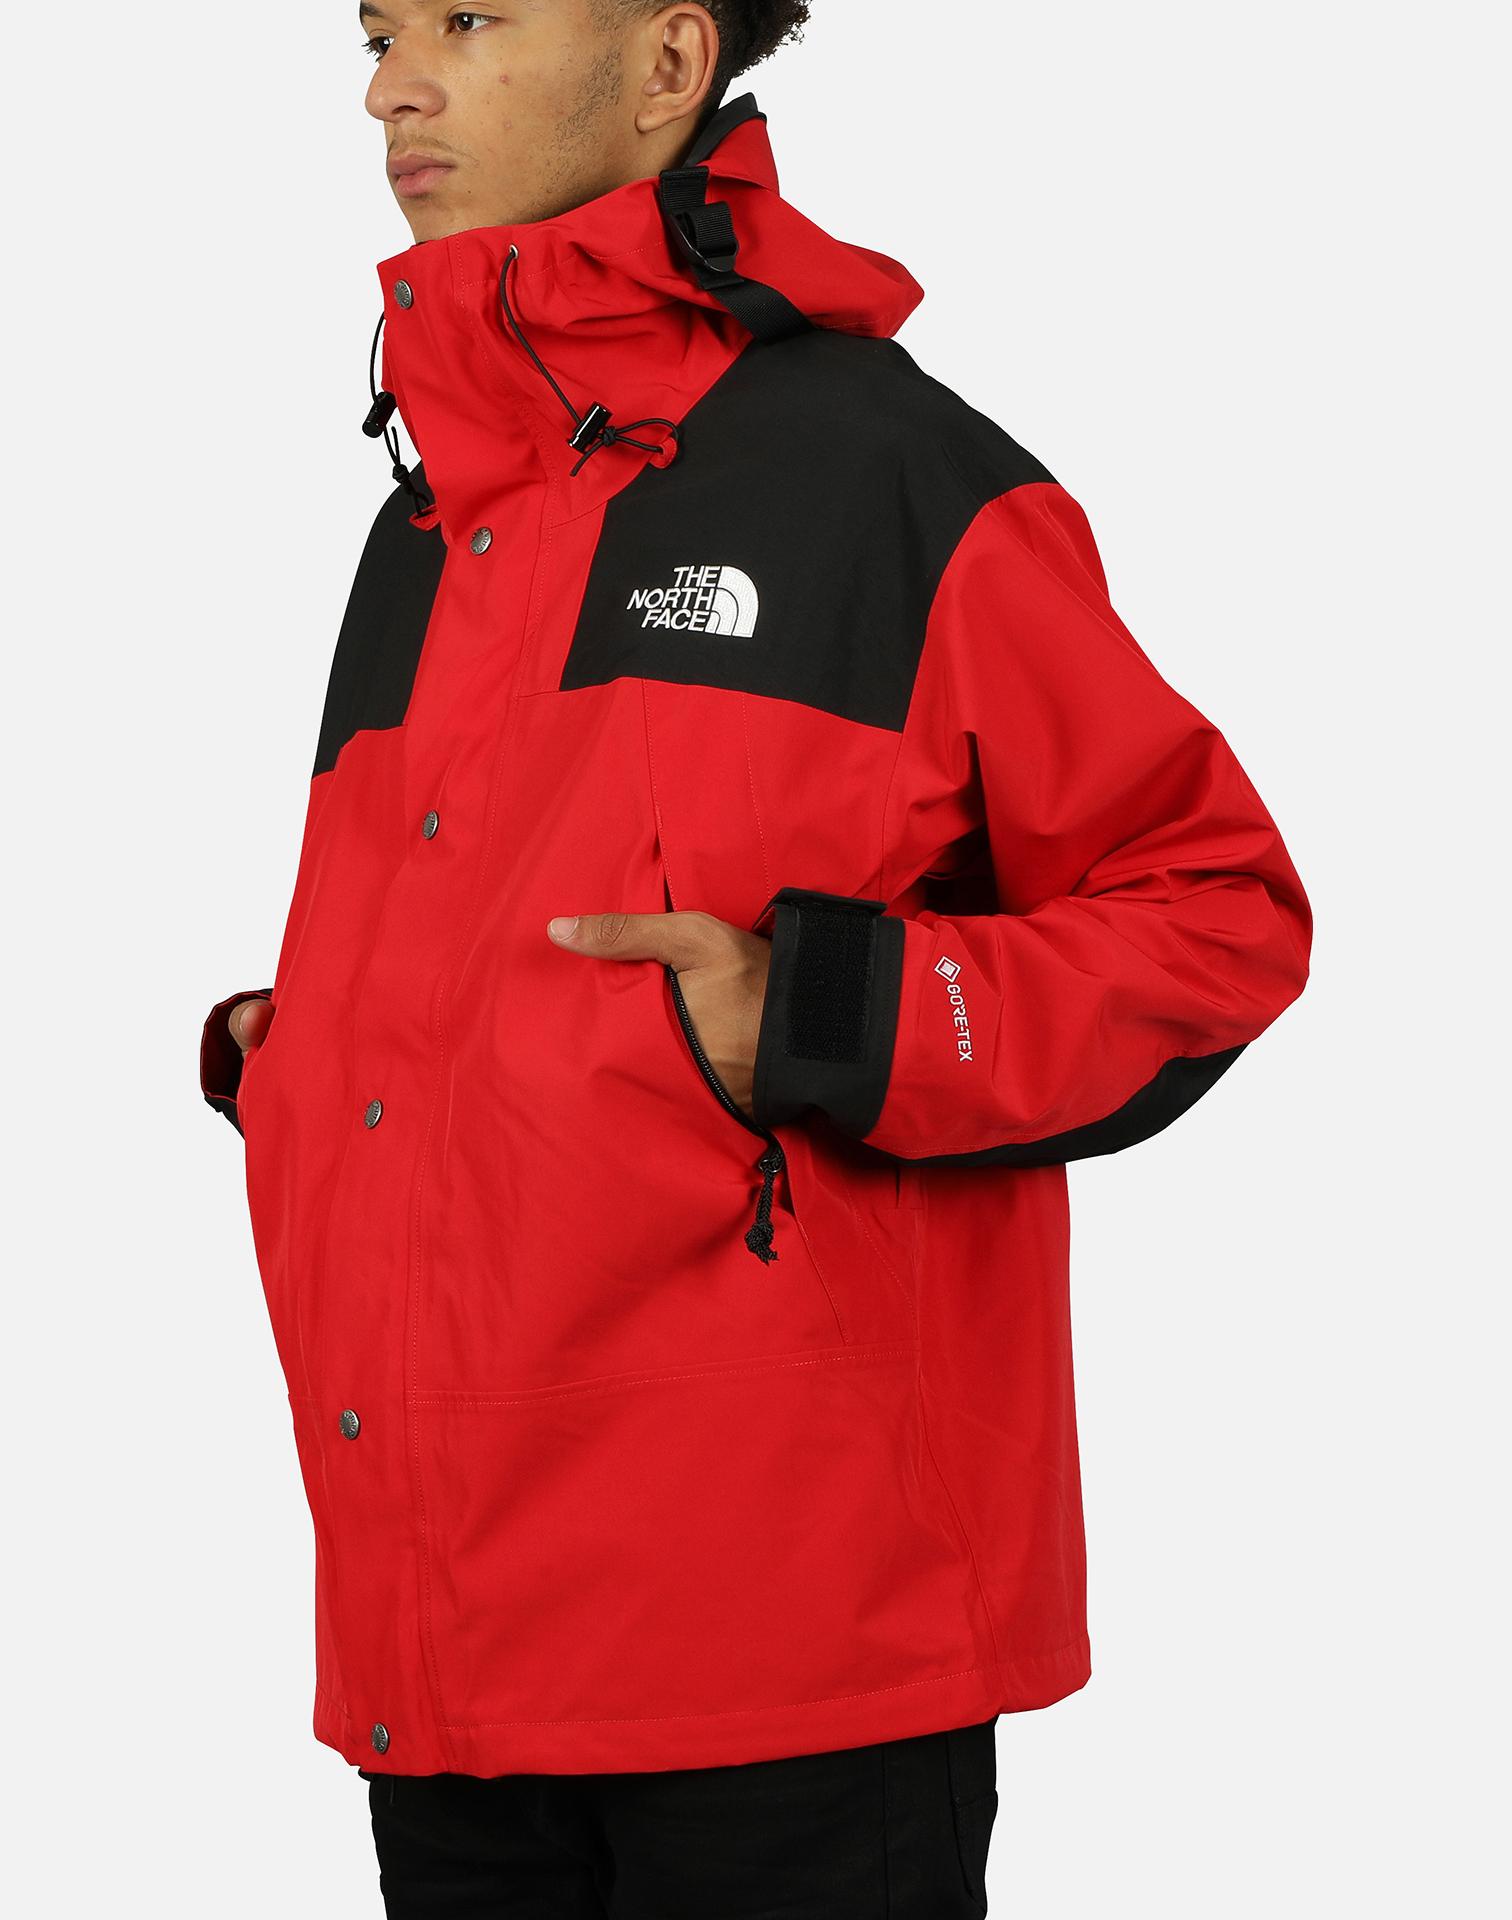 The North Face 1990 Mountain Jacket Gtx in Red - Lyst